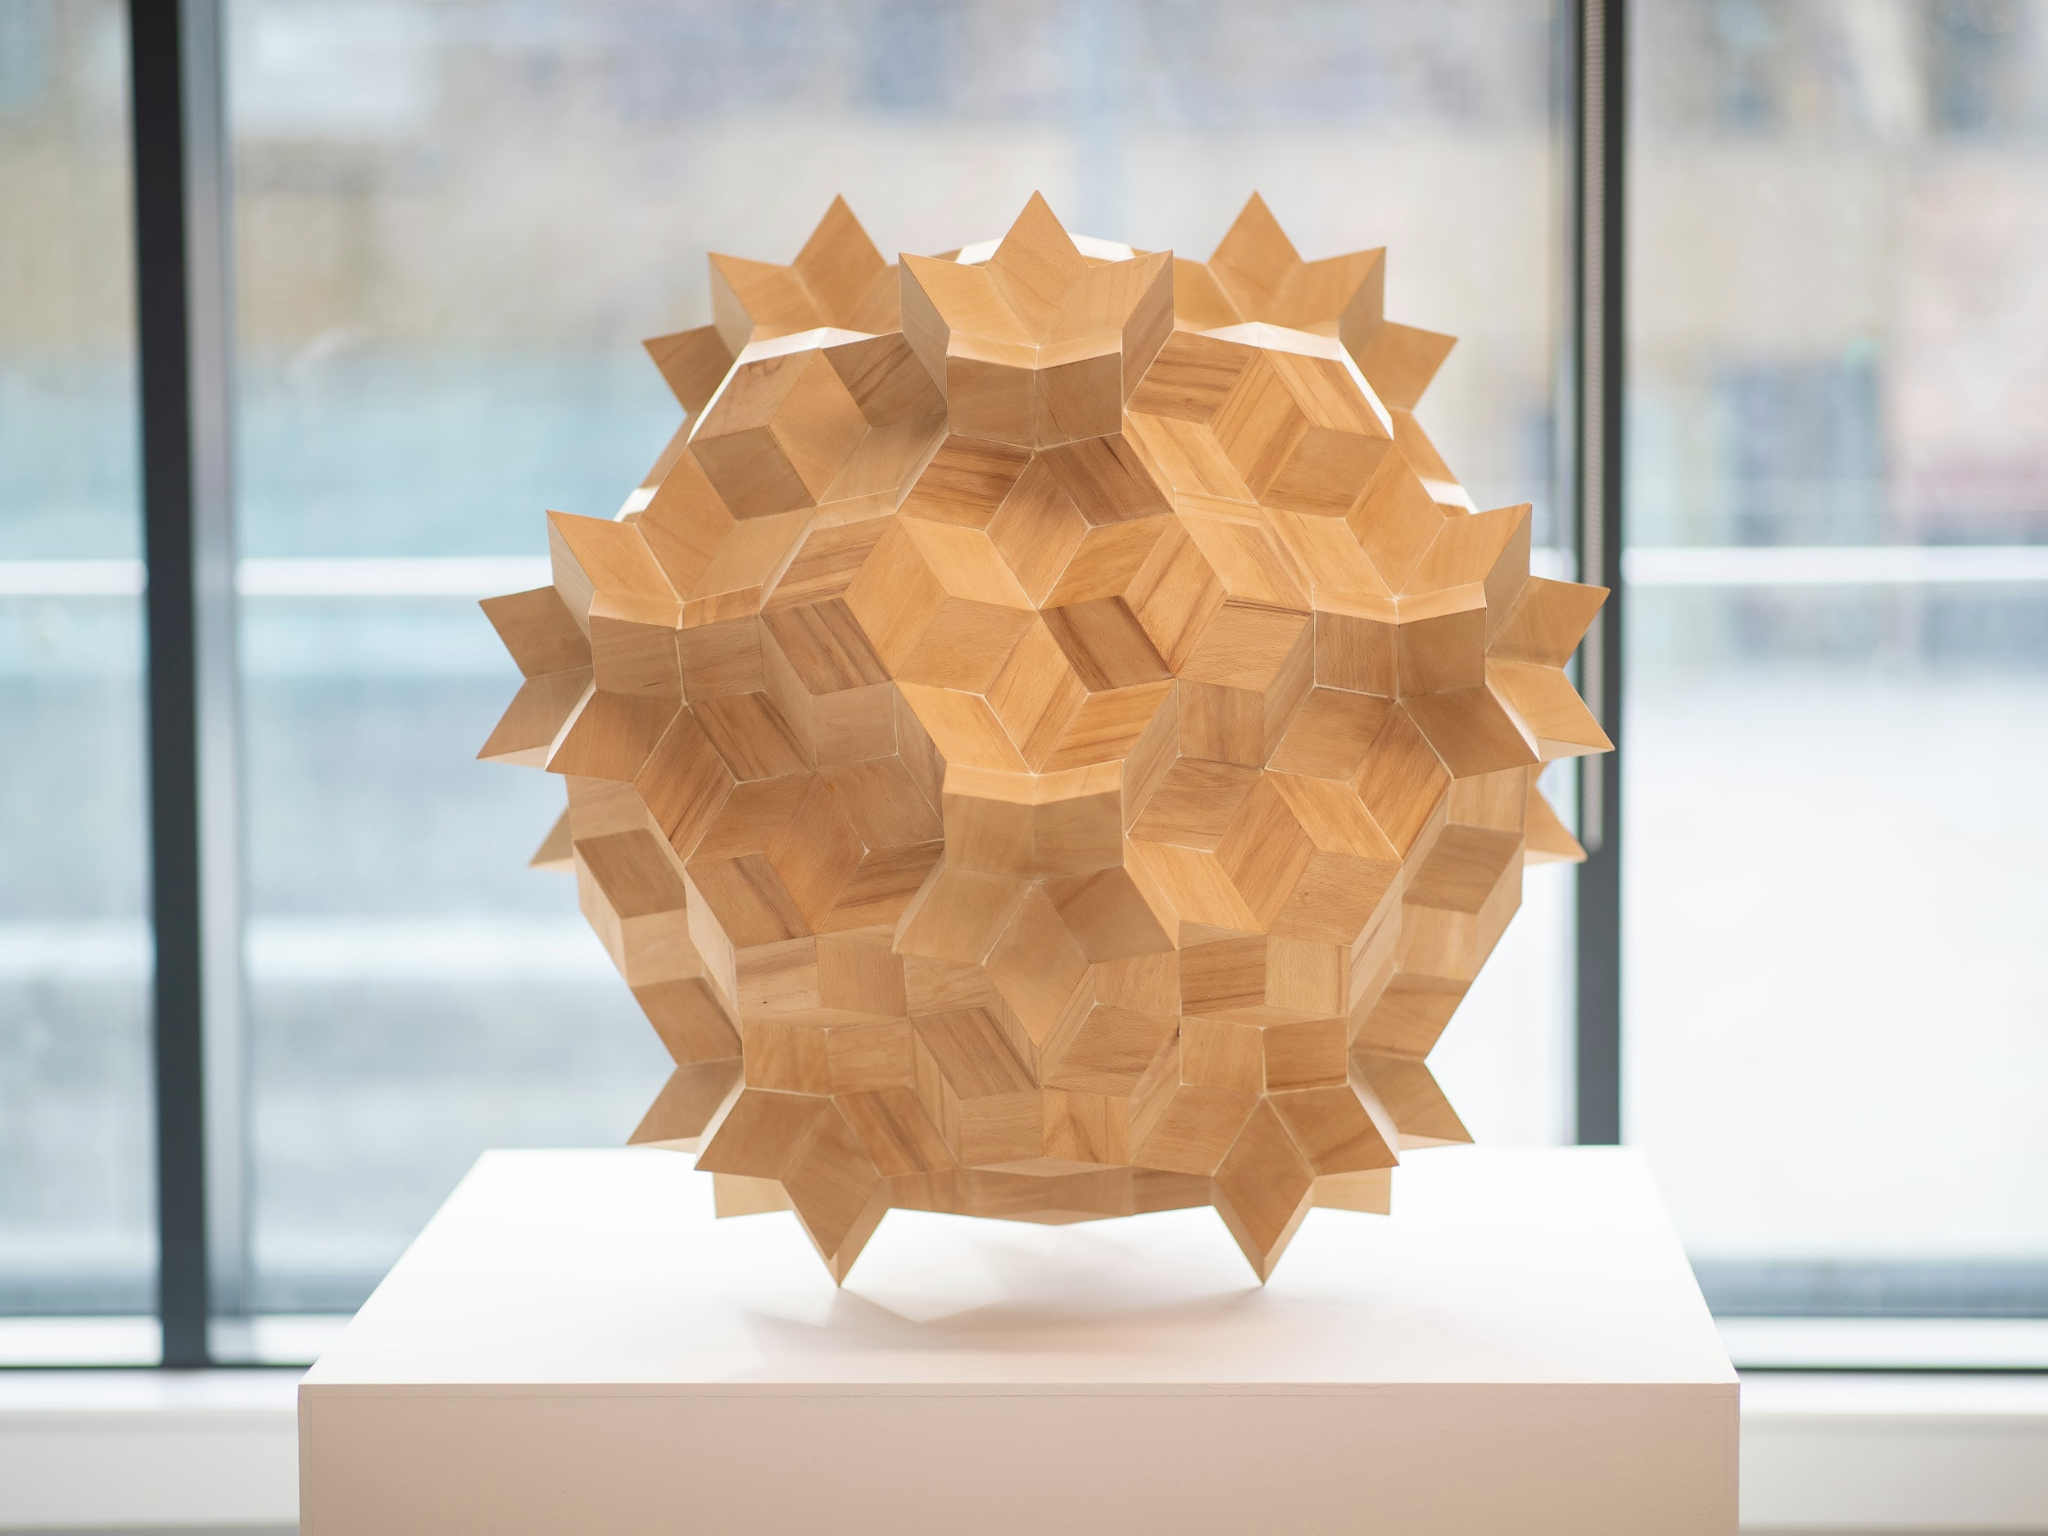 Dominic Hopkinson: Pentahectatetracontrahedron (2019). Plywood, 90cm diameter. “Scientific Sublime” exhibition at blank_ gallery, Leeds City College. Photo: BLANK_ gallery, Leeds.